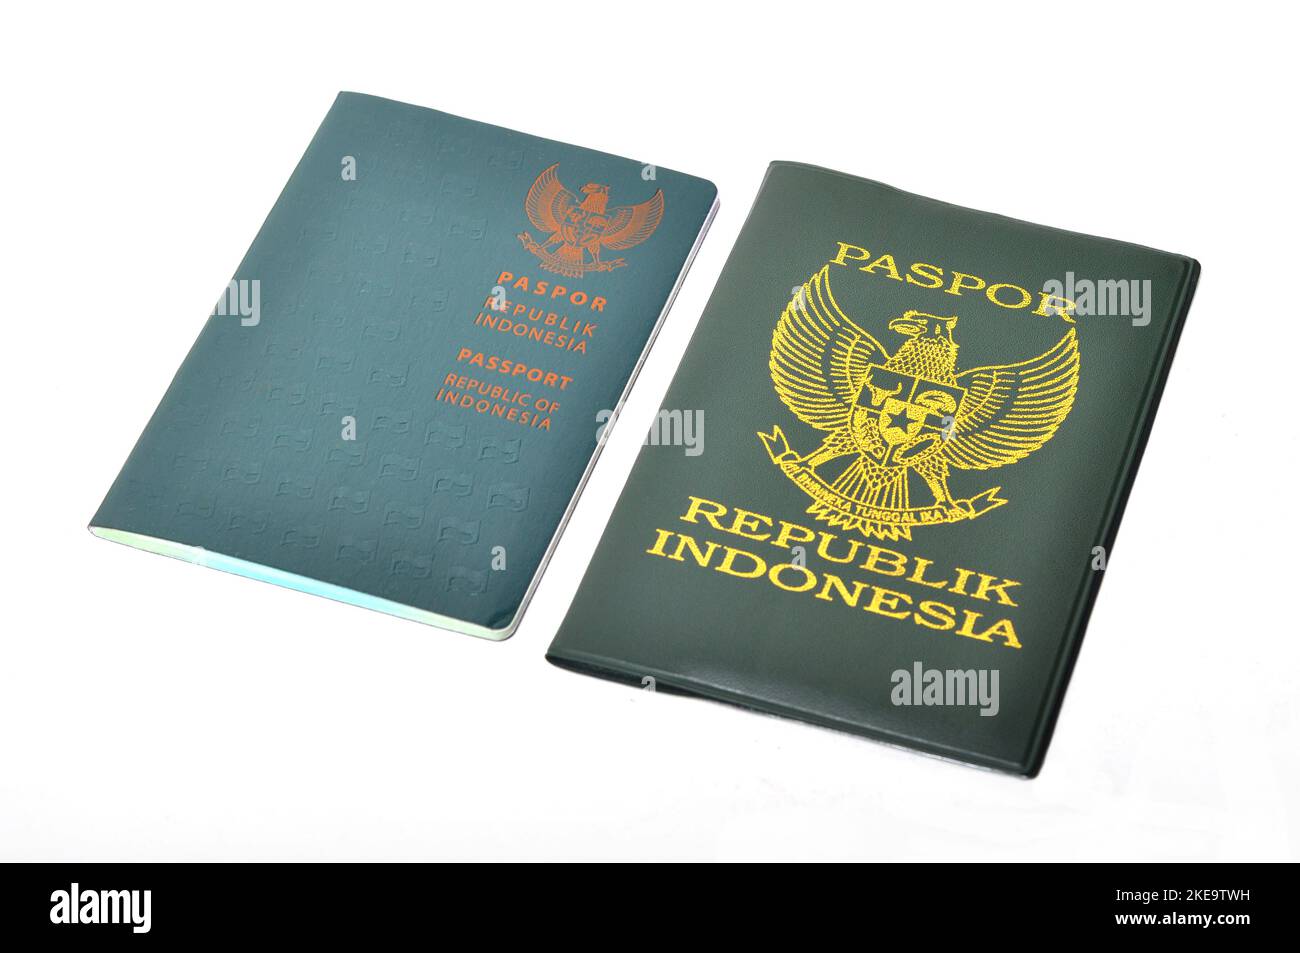 Republic of Indonesia passport book with green cover on white background Stock Photo